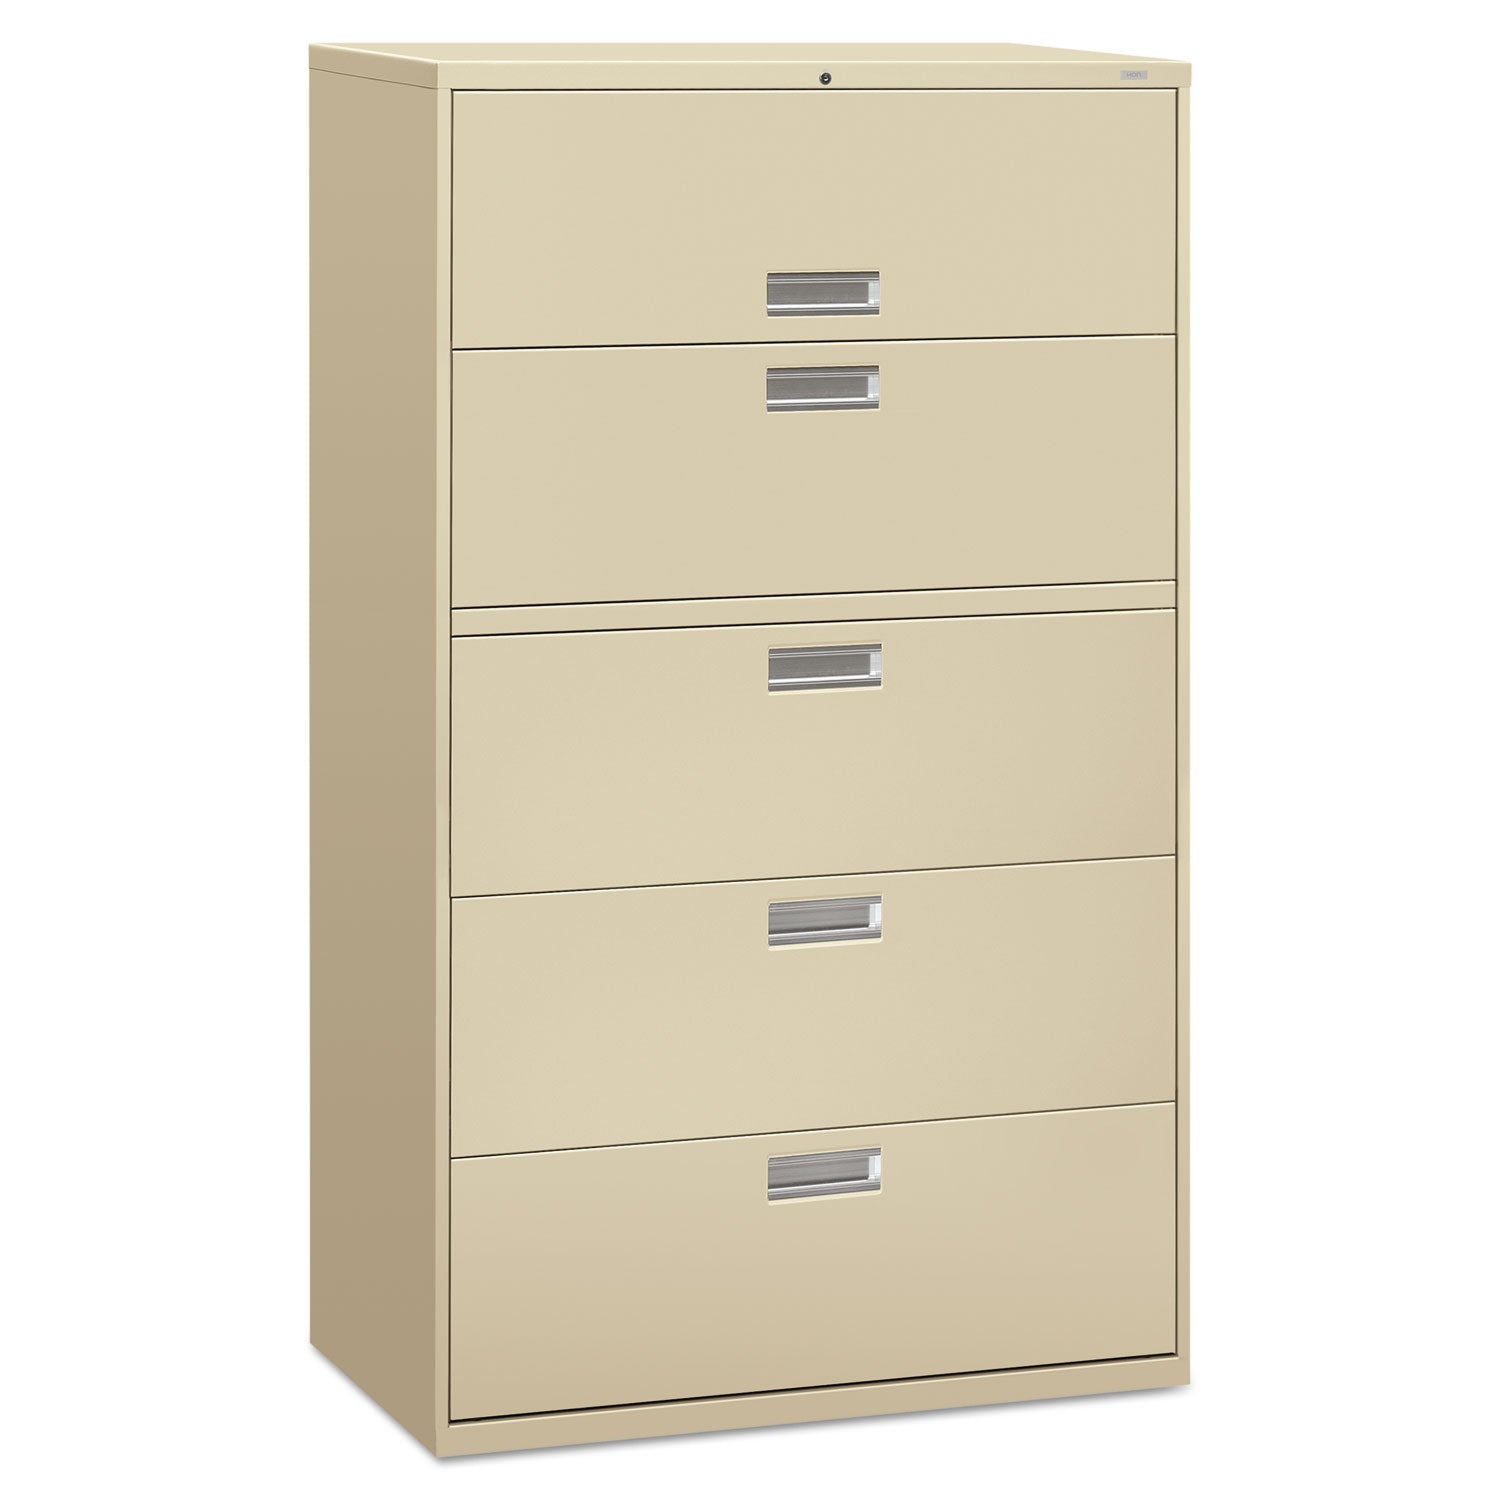 Brigade 600 Series Lateral File, 4 Legal/Letter-Size File Drawers, 1 Roll-Out File Shelf, Putty, 42" x 18" x 64.25 - 